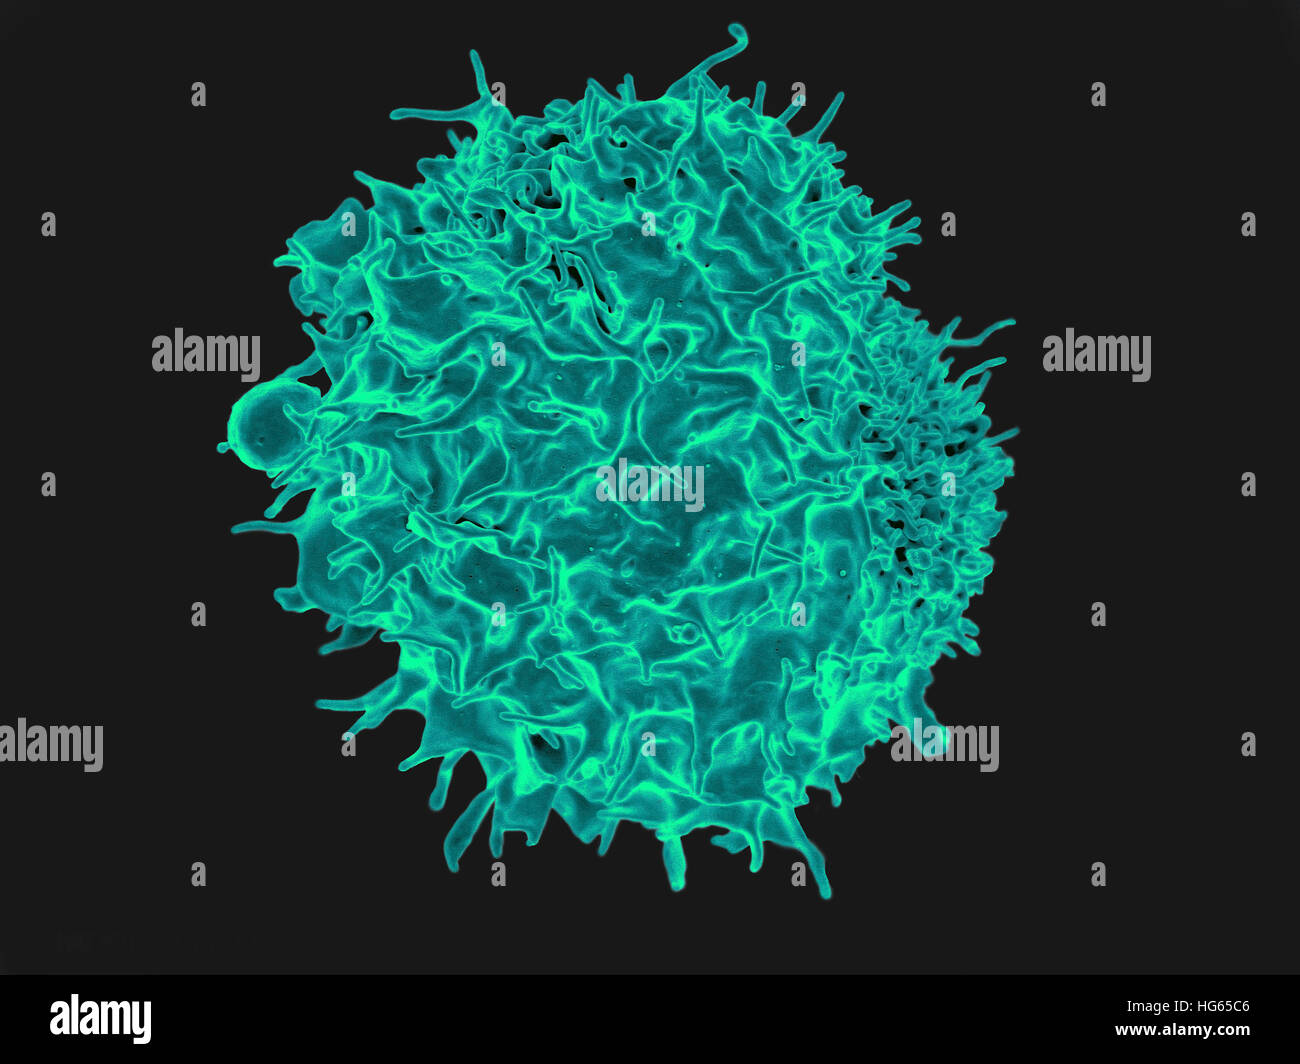 Colorized scanning electron micrograph of a T lymphocyte. Stock Photo